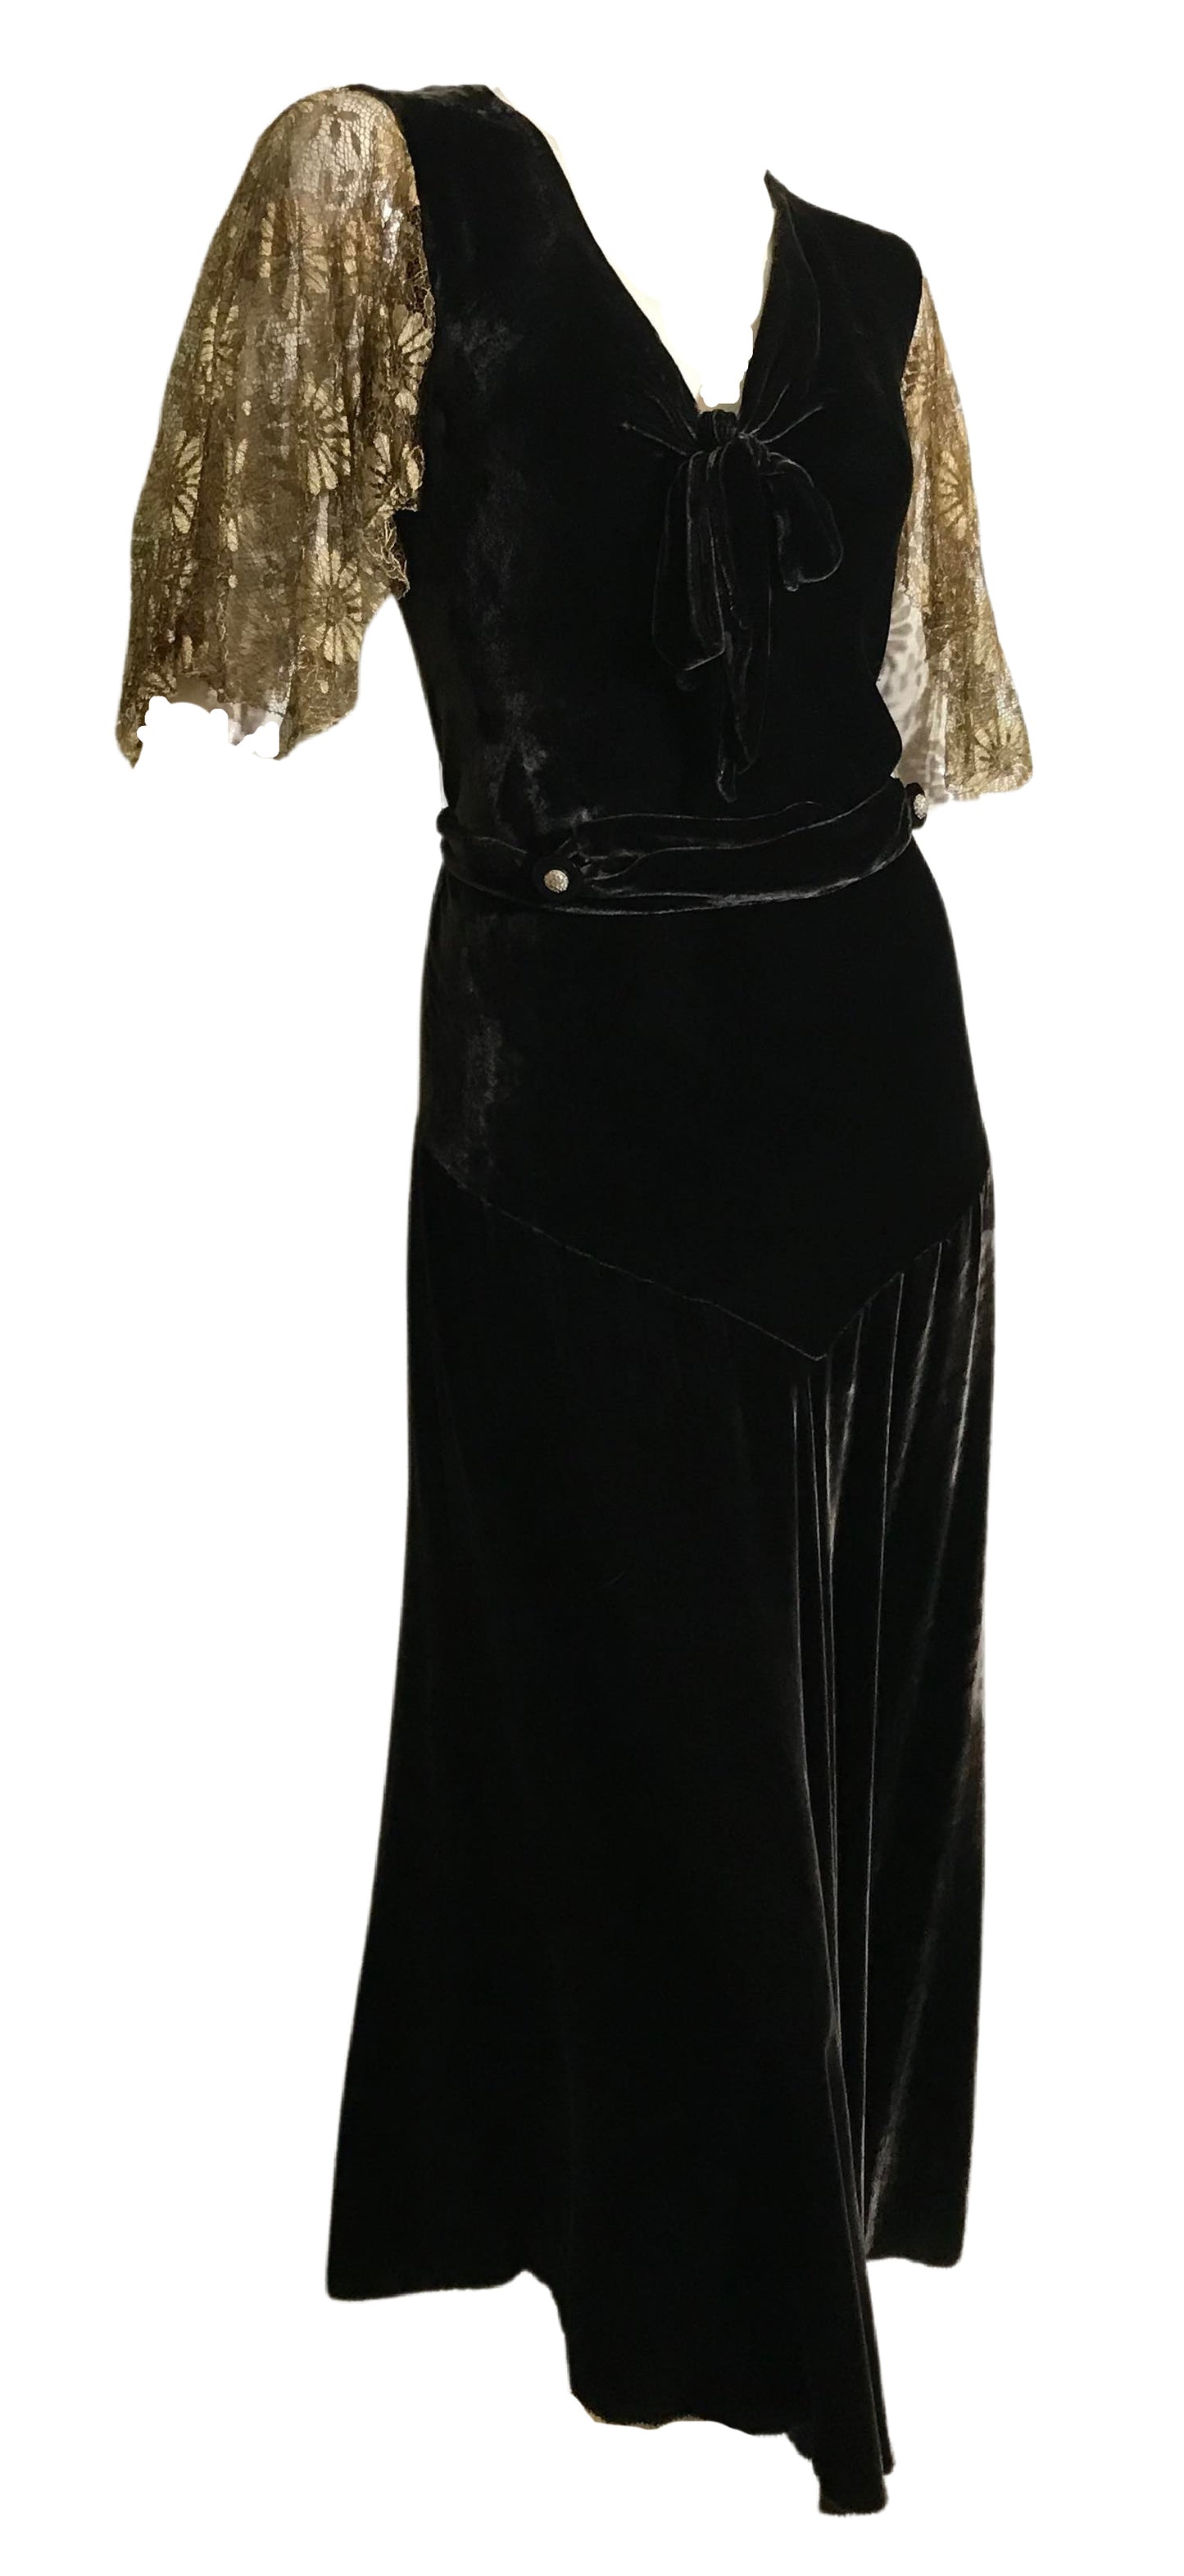 Deepest Cocoa Silk Velvet Dress with Lace Cape Sleeves and Matching Jacket with Flower circa 1930s